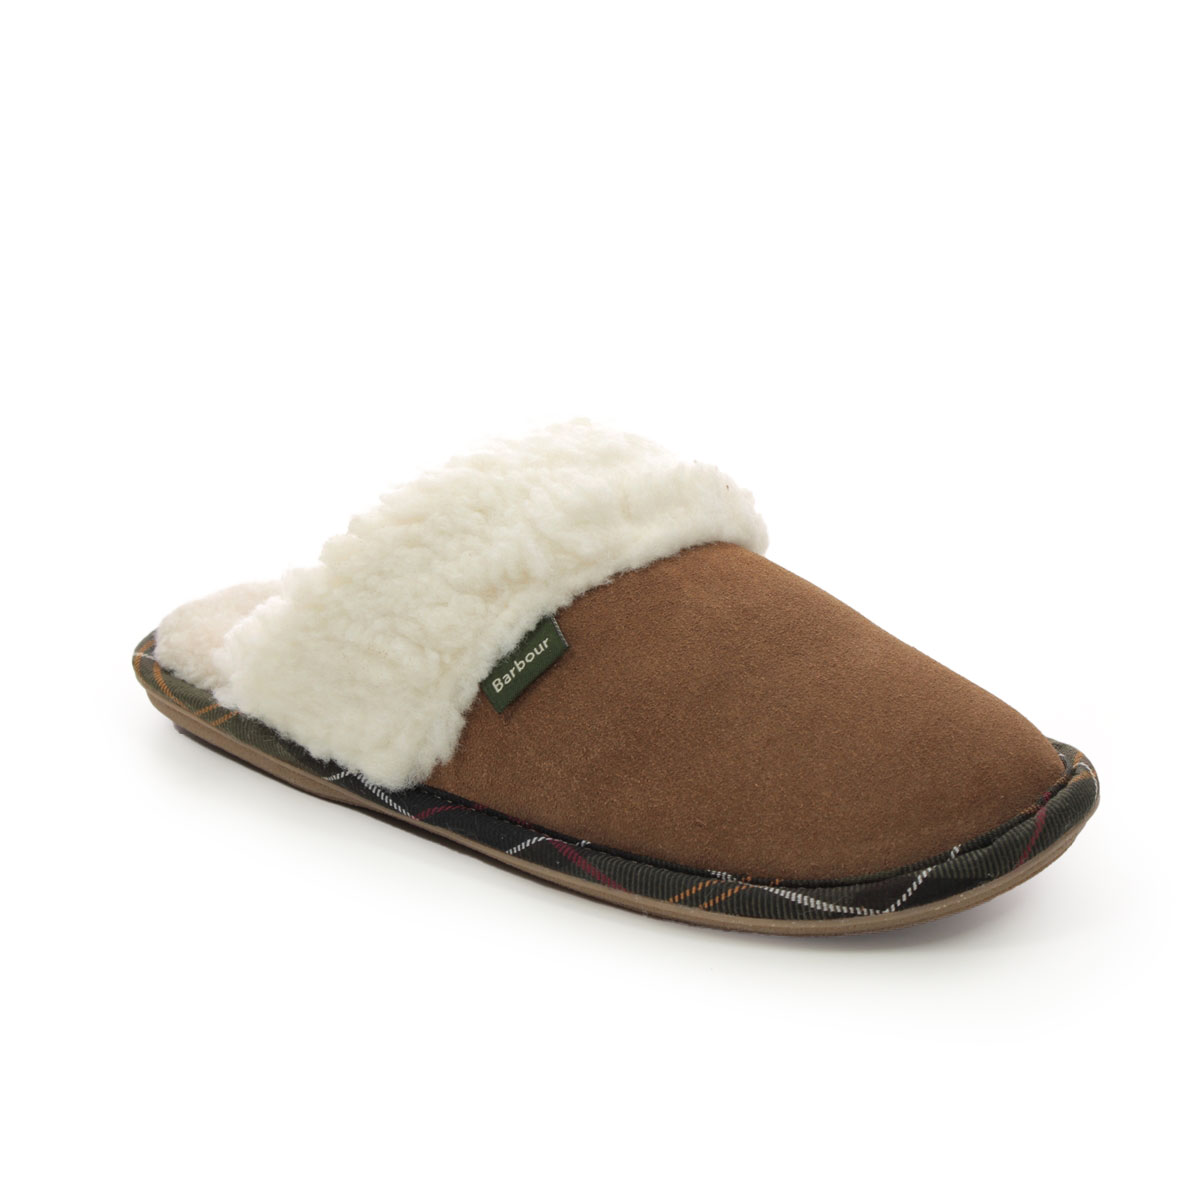 Barbour Lydia Tan suede Womens slipper mules LSL0005-BE51 in a Plain Leather in Size 4